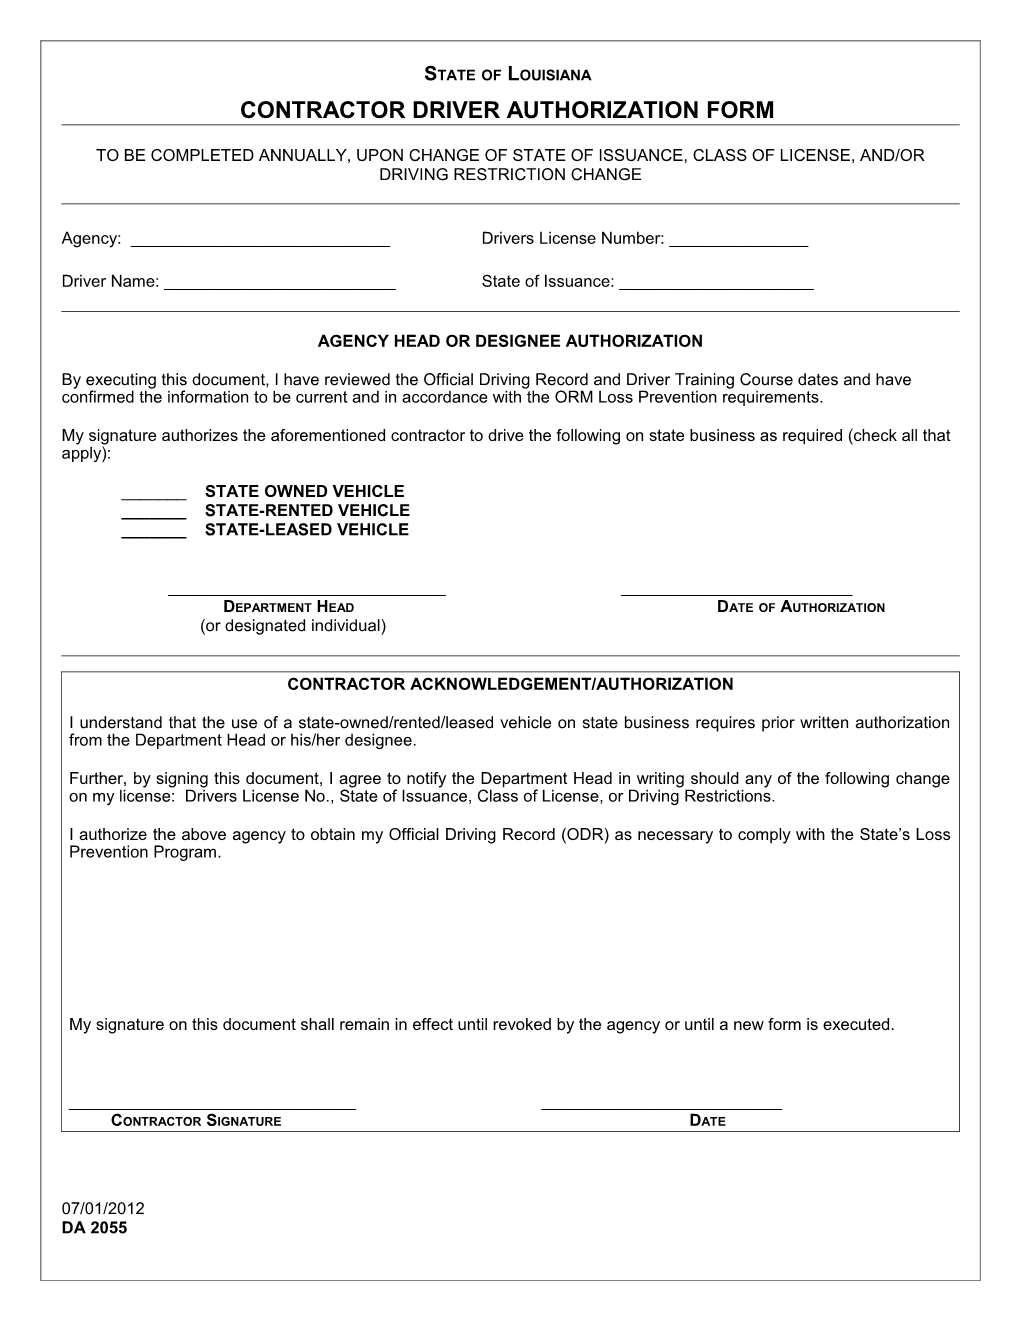 Authorization and Driving History Form